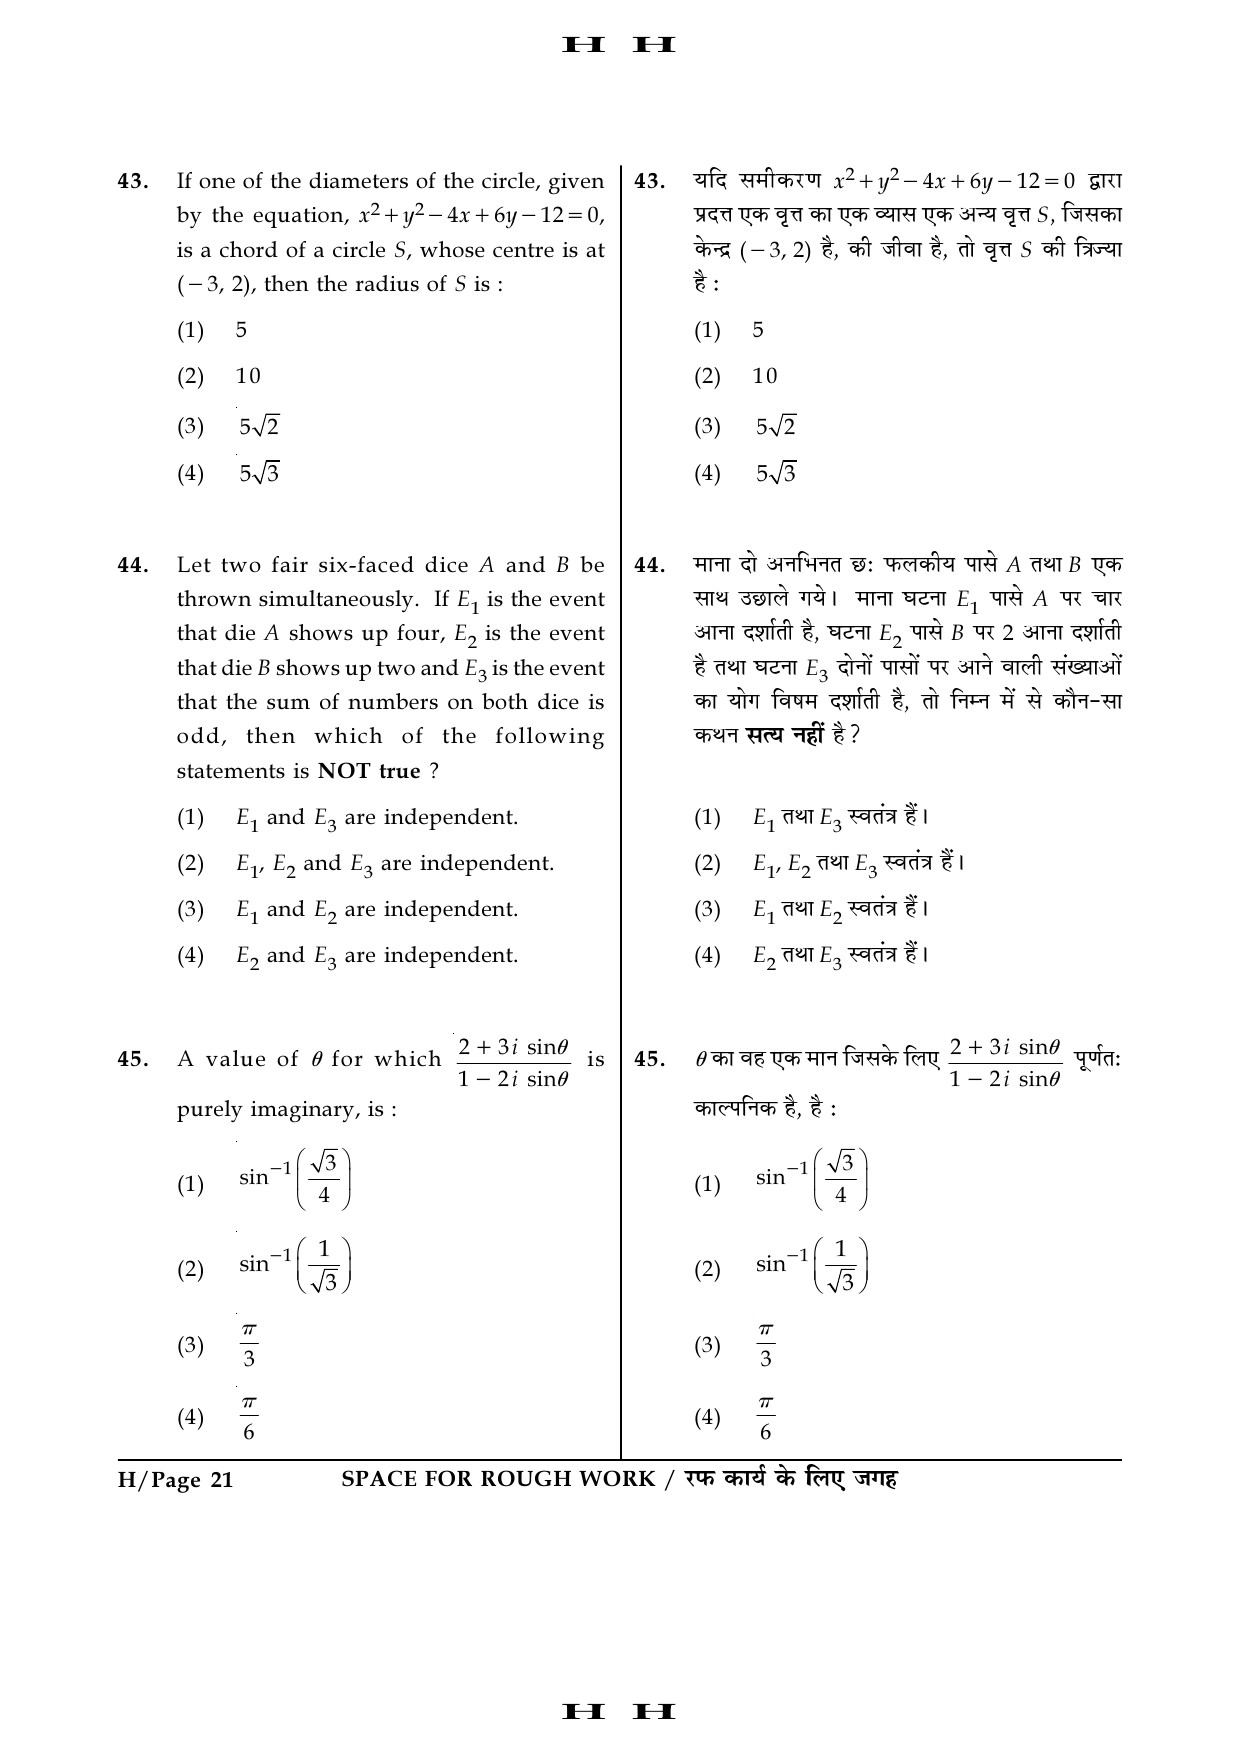 JEE Main Exam Question Paper 2016 Booklet H 21